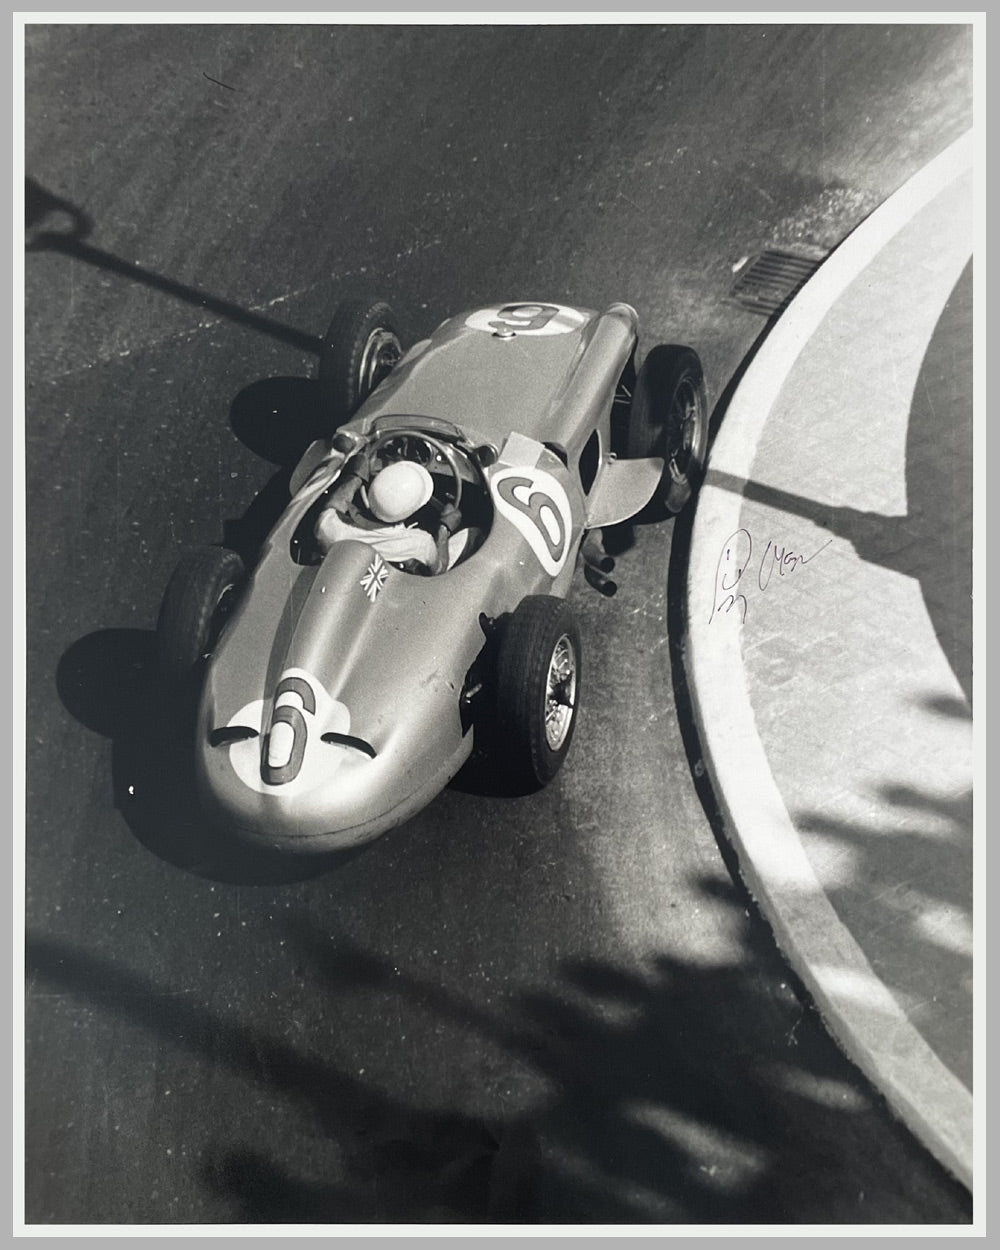 Stirling Moss at the Monaco Grand Prix in 1955 autographed photograph